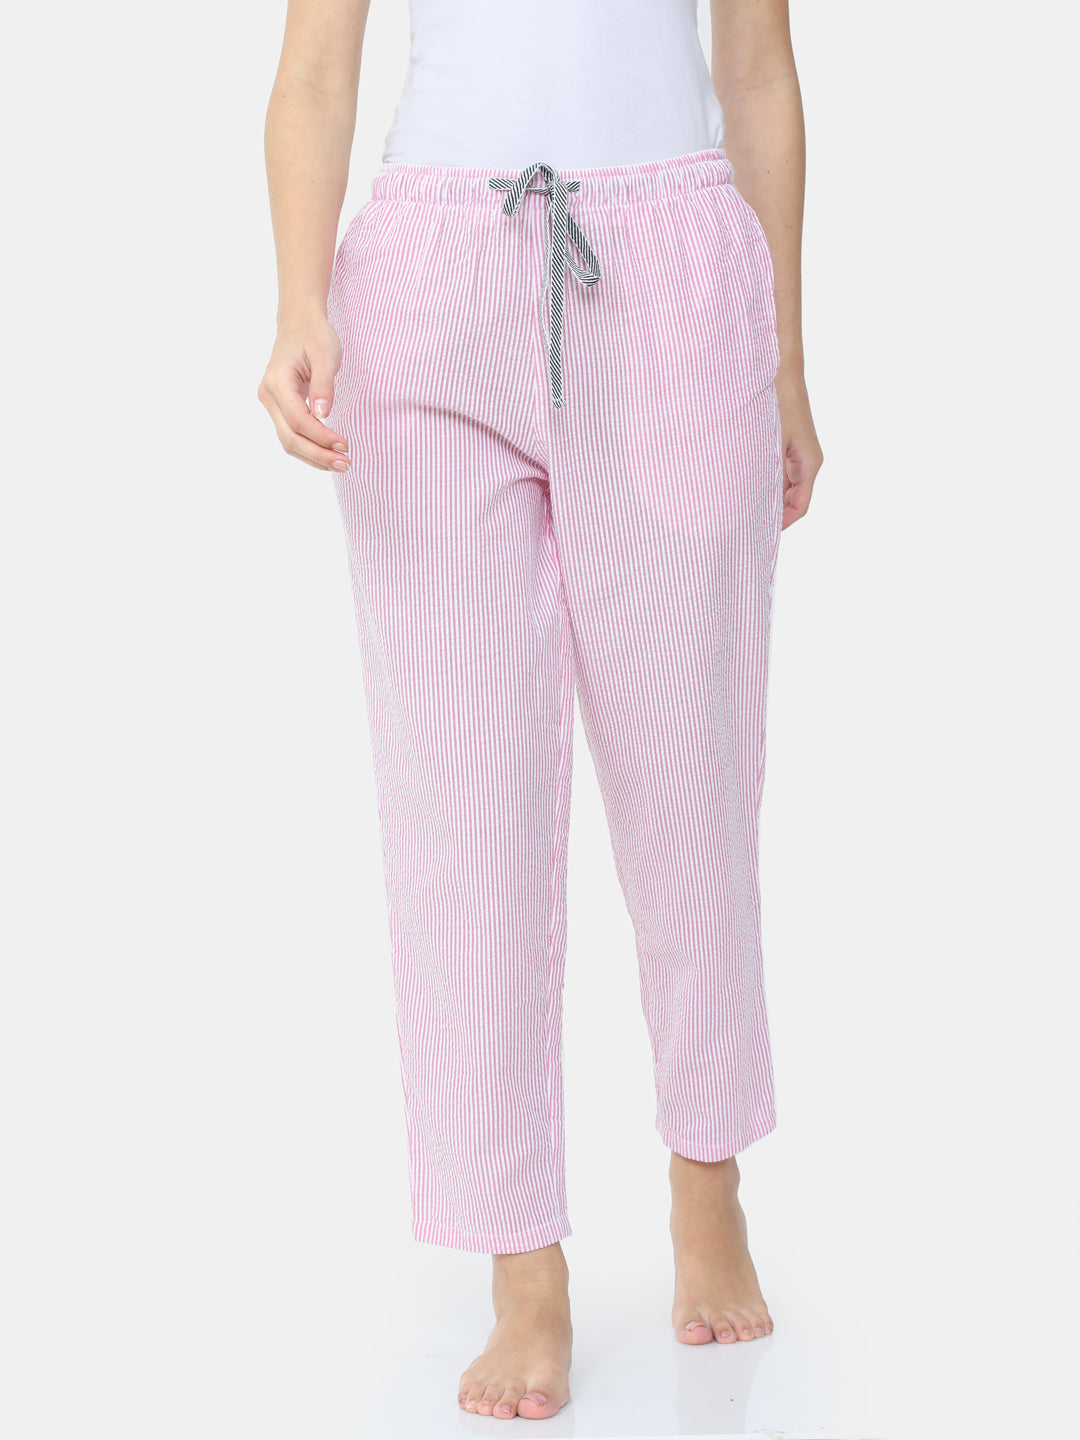 The Stripes Go With Everything Women PJ Pant